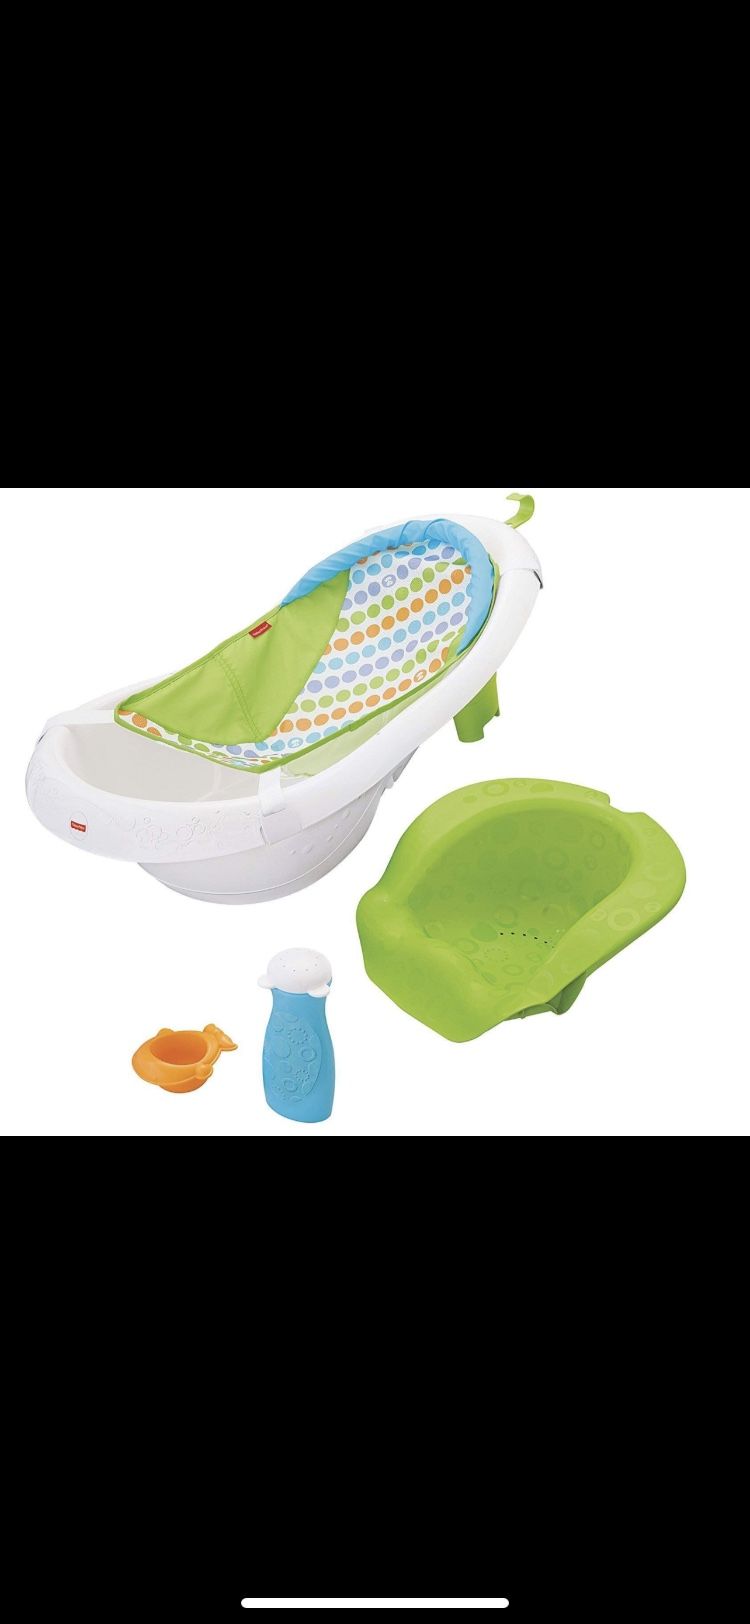 Fisher-Price 4-in-1 Sling ‘n Seat Tub